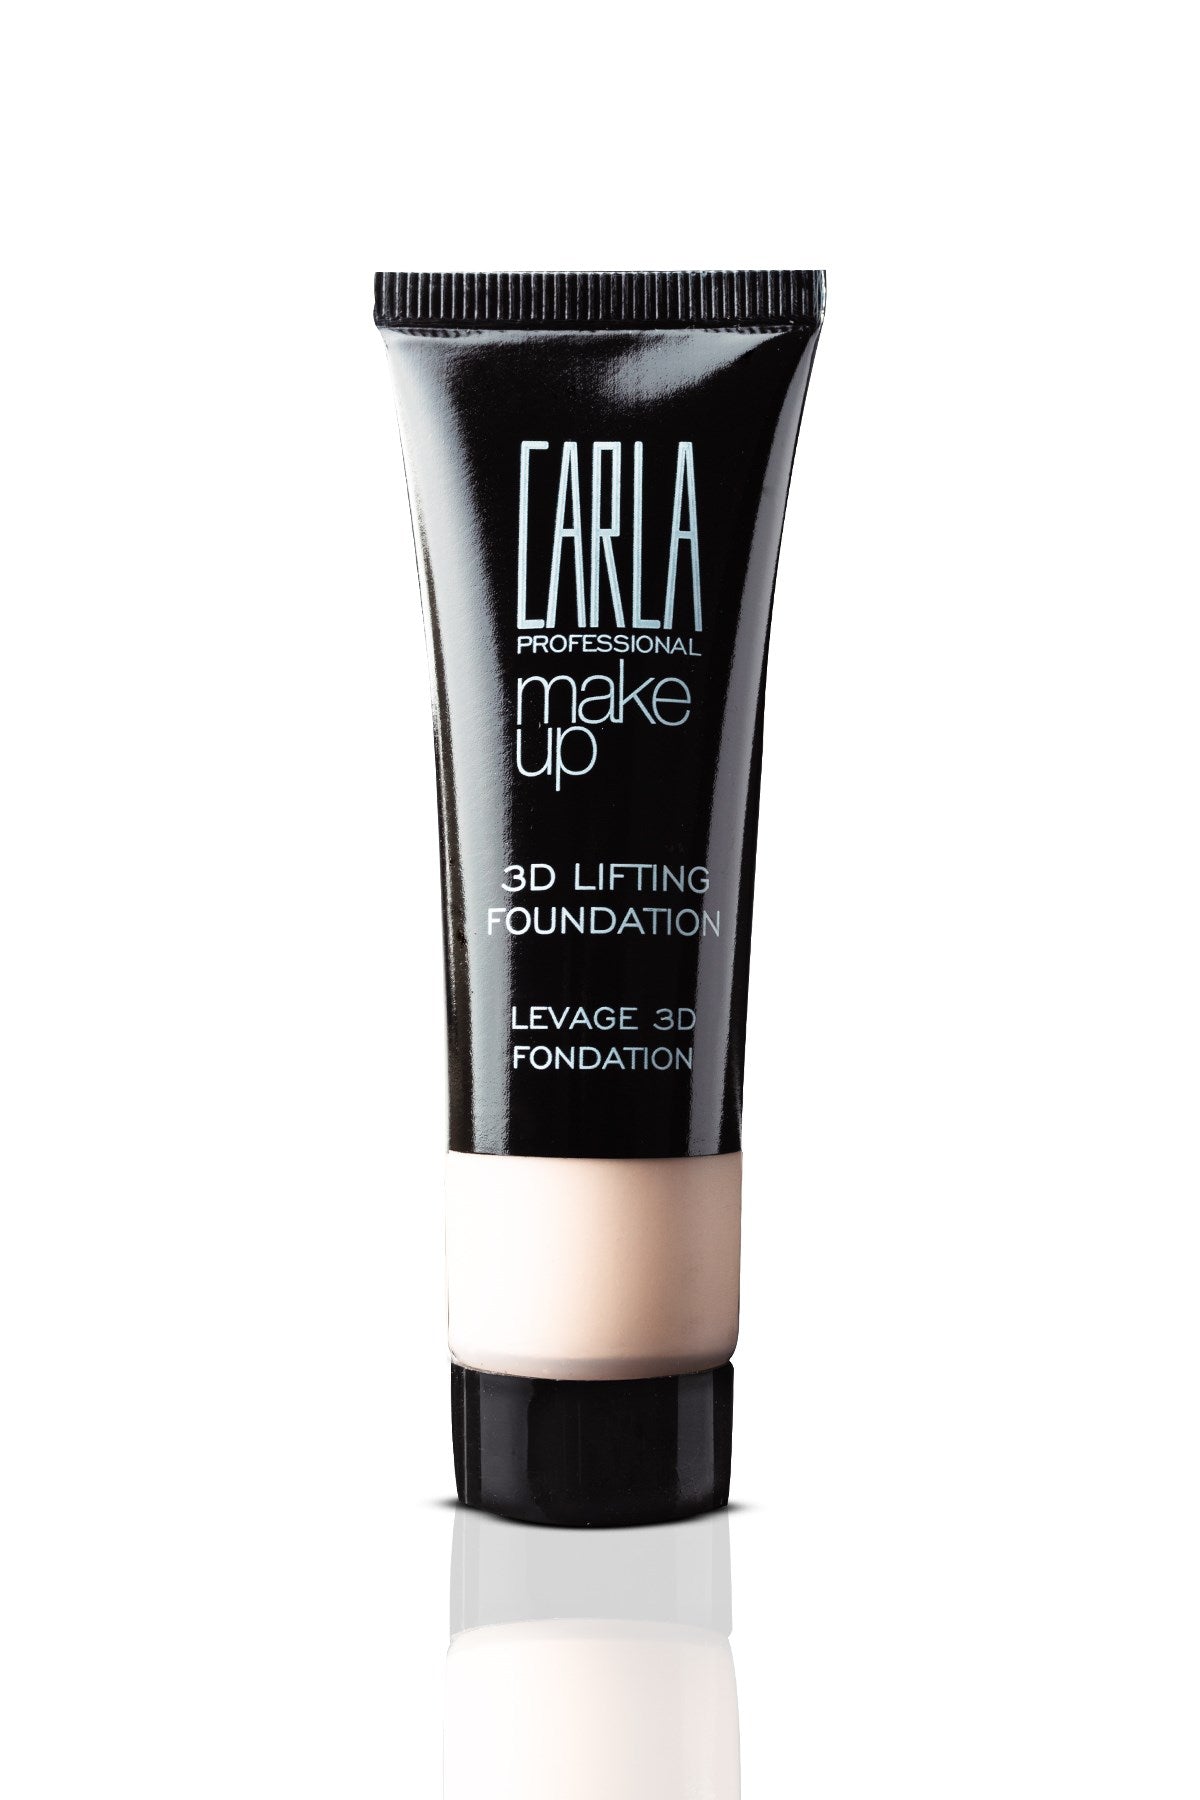 Carla 3D Lifting Foundation - Revive Your Radiance and Combat Aging with Light-Reflecting Magic!